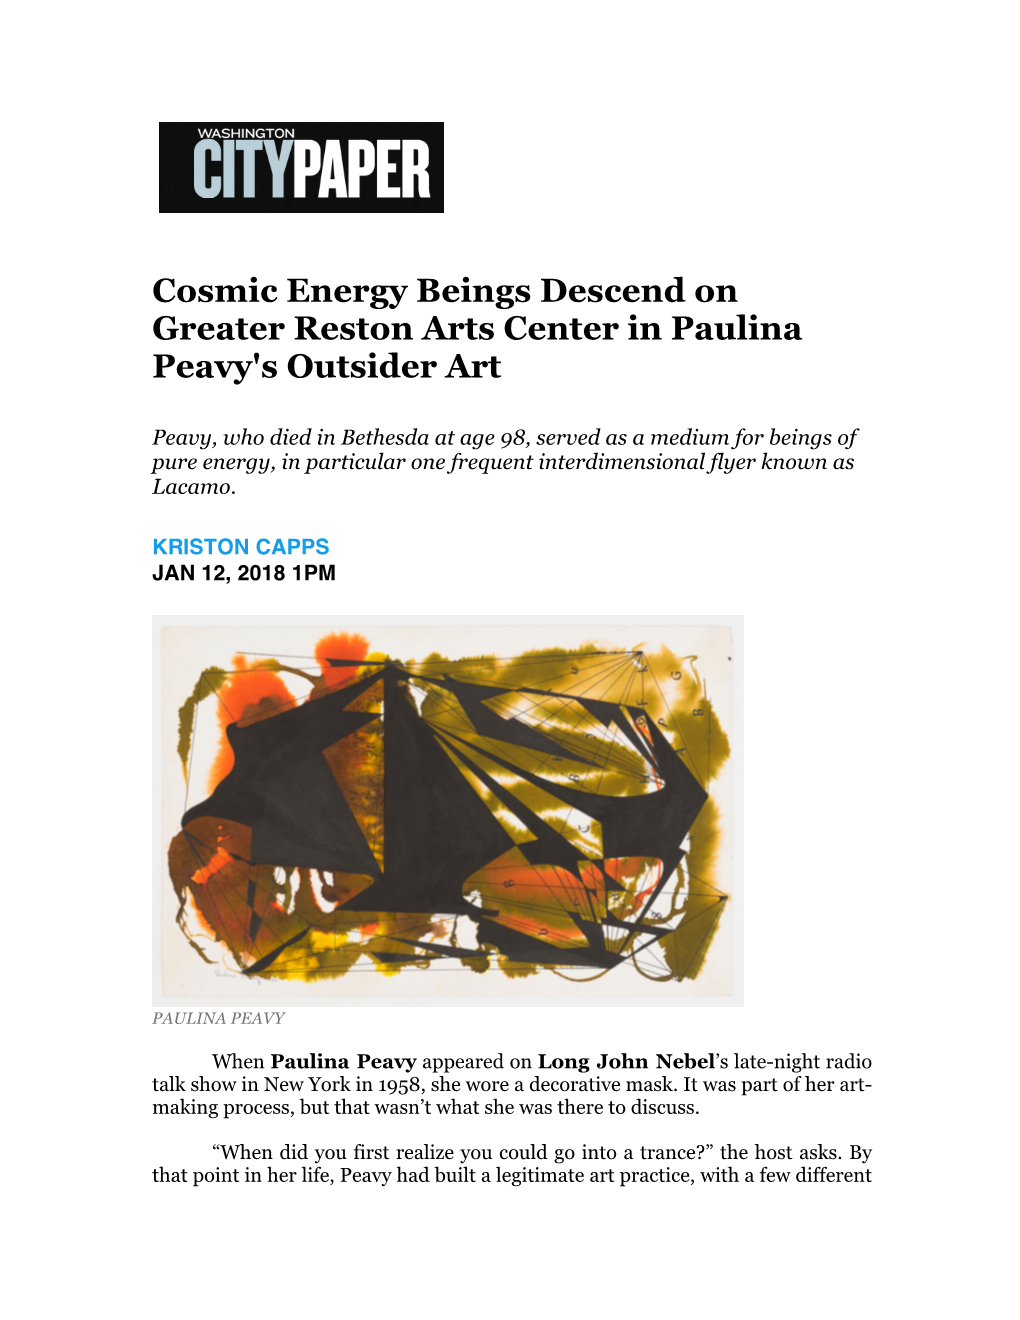 Cosmic Energy Beings Descend on Greater Reston Arts Center in Paulina Peavy's Outsider Art